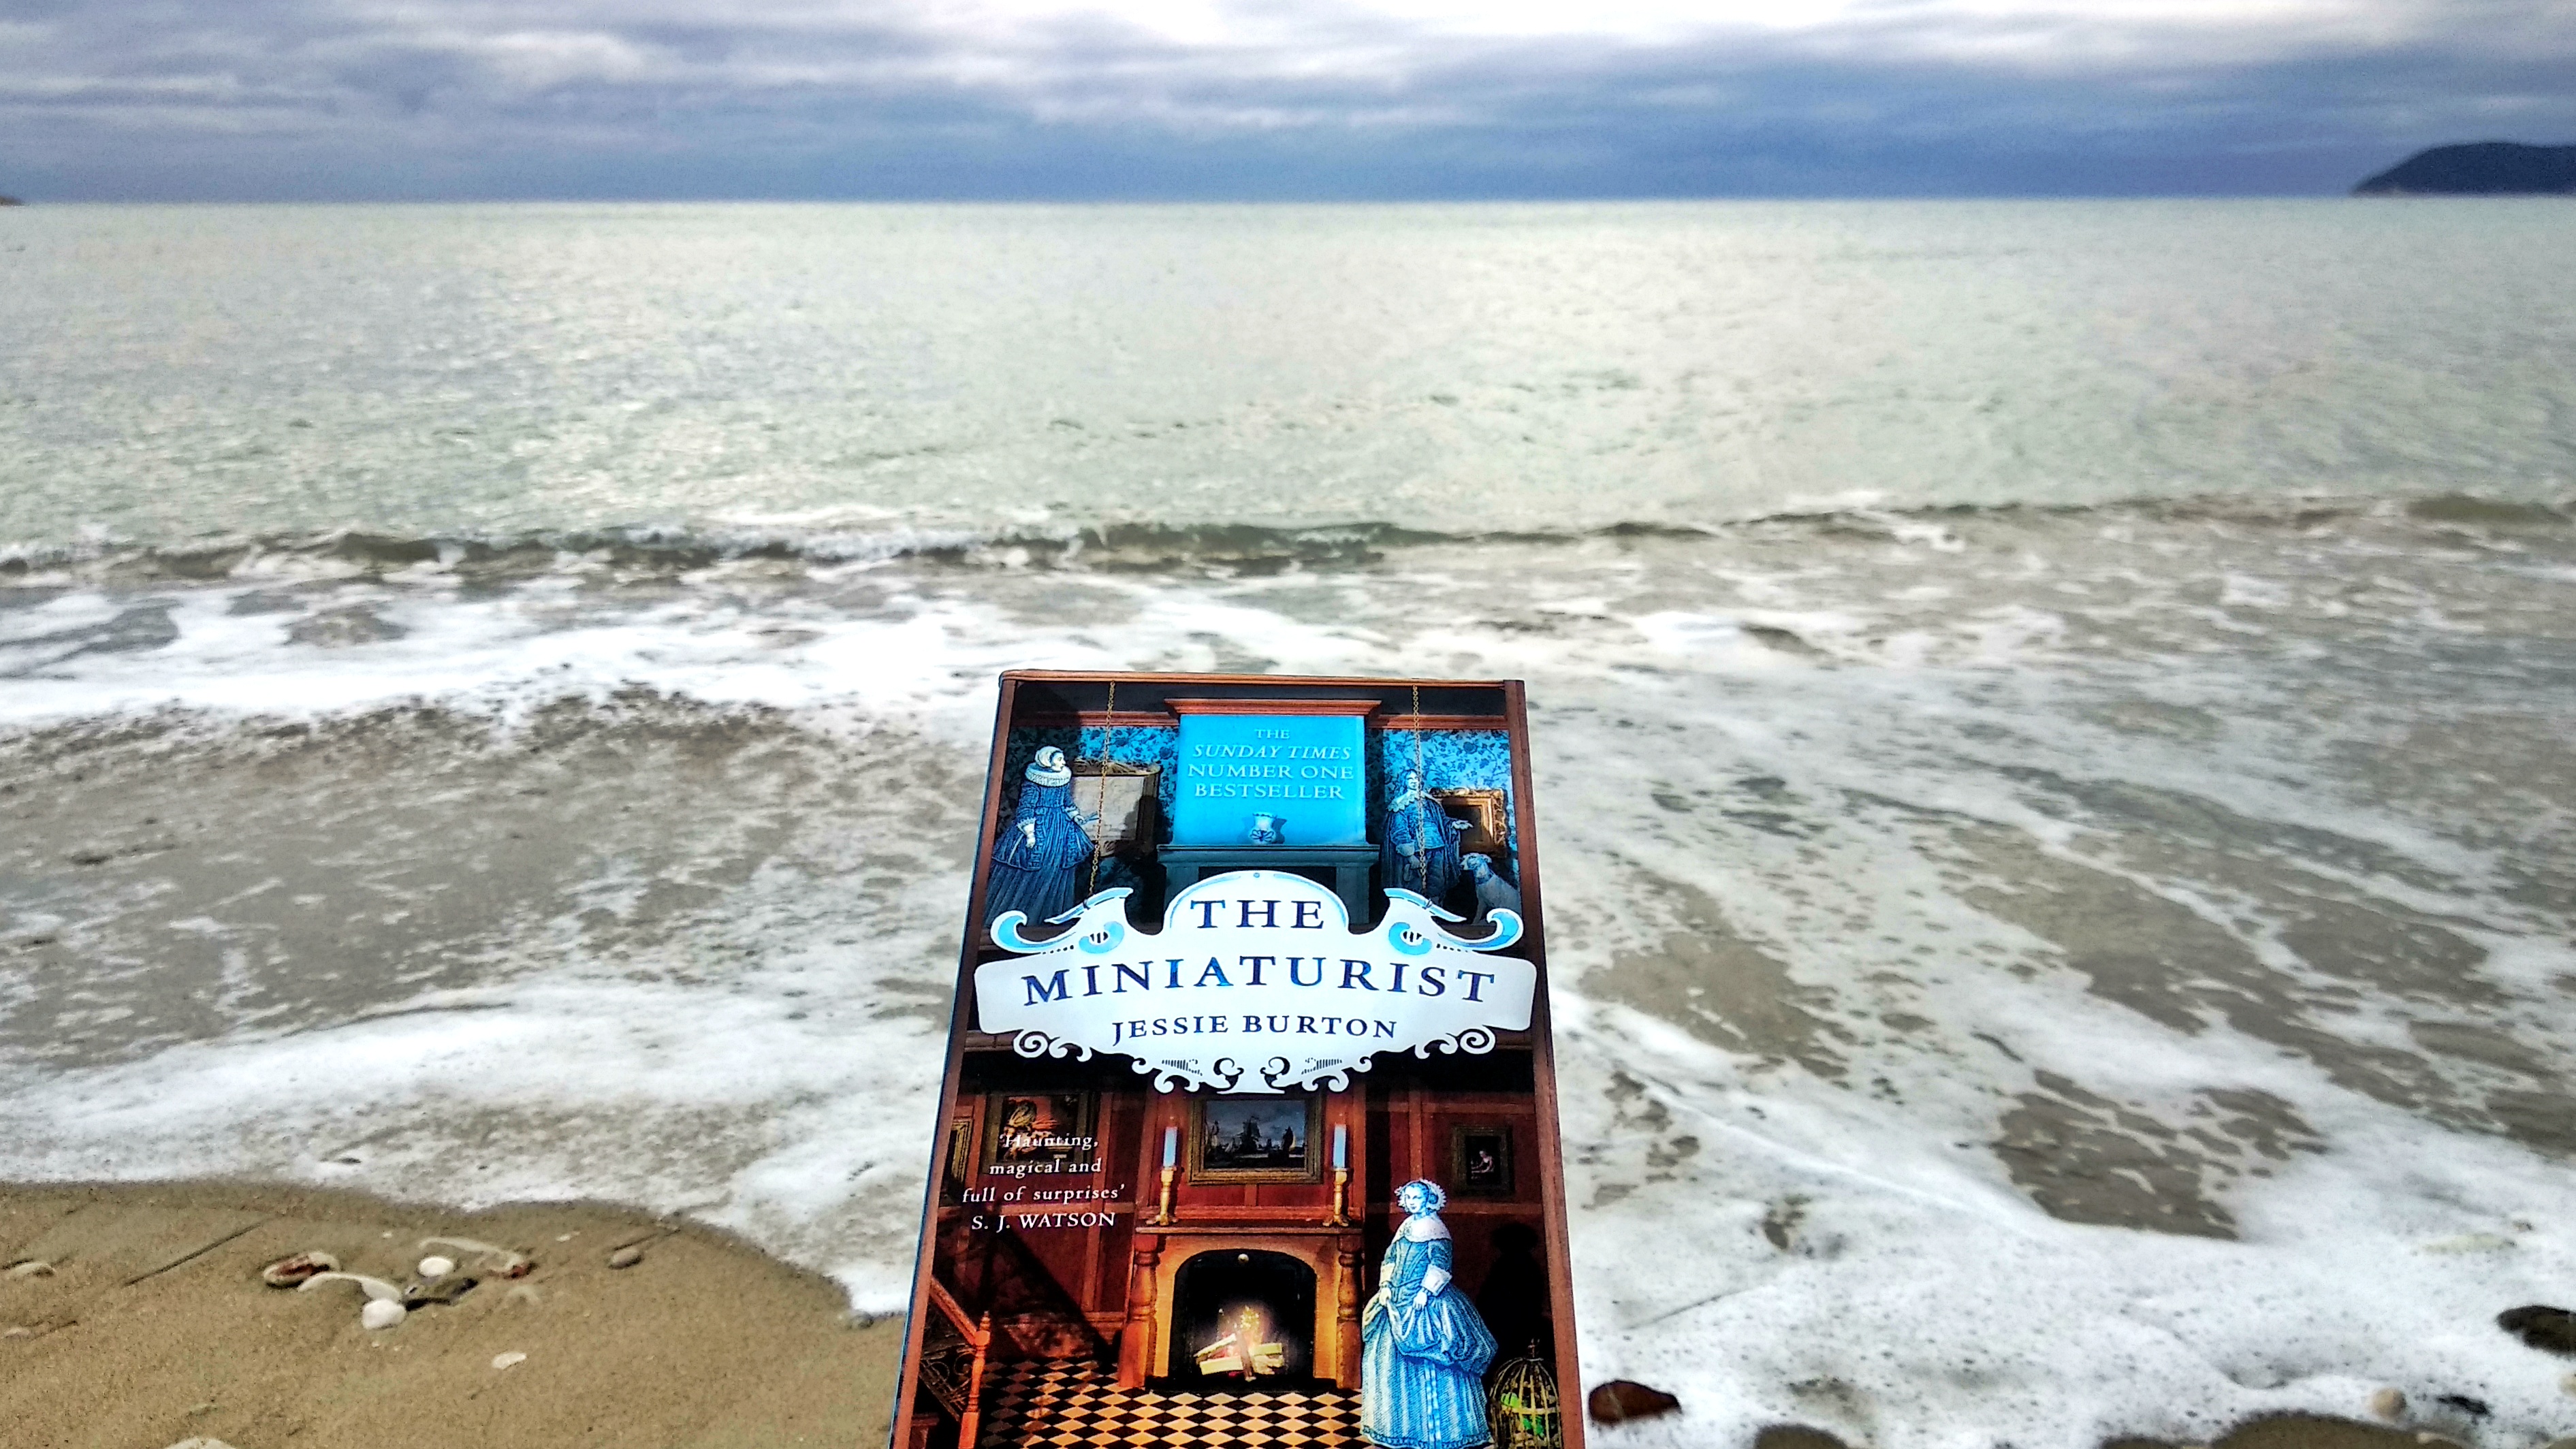 The book in front of the sea